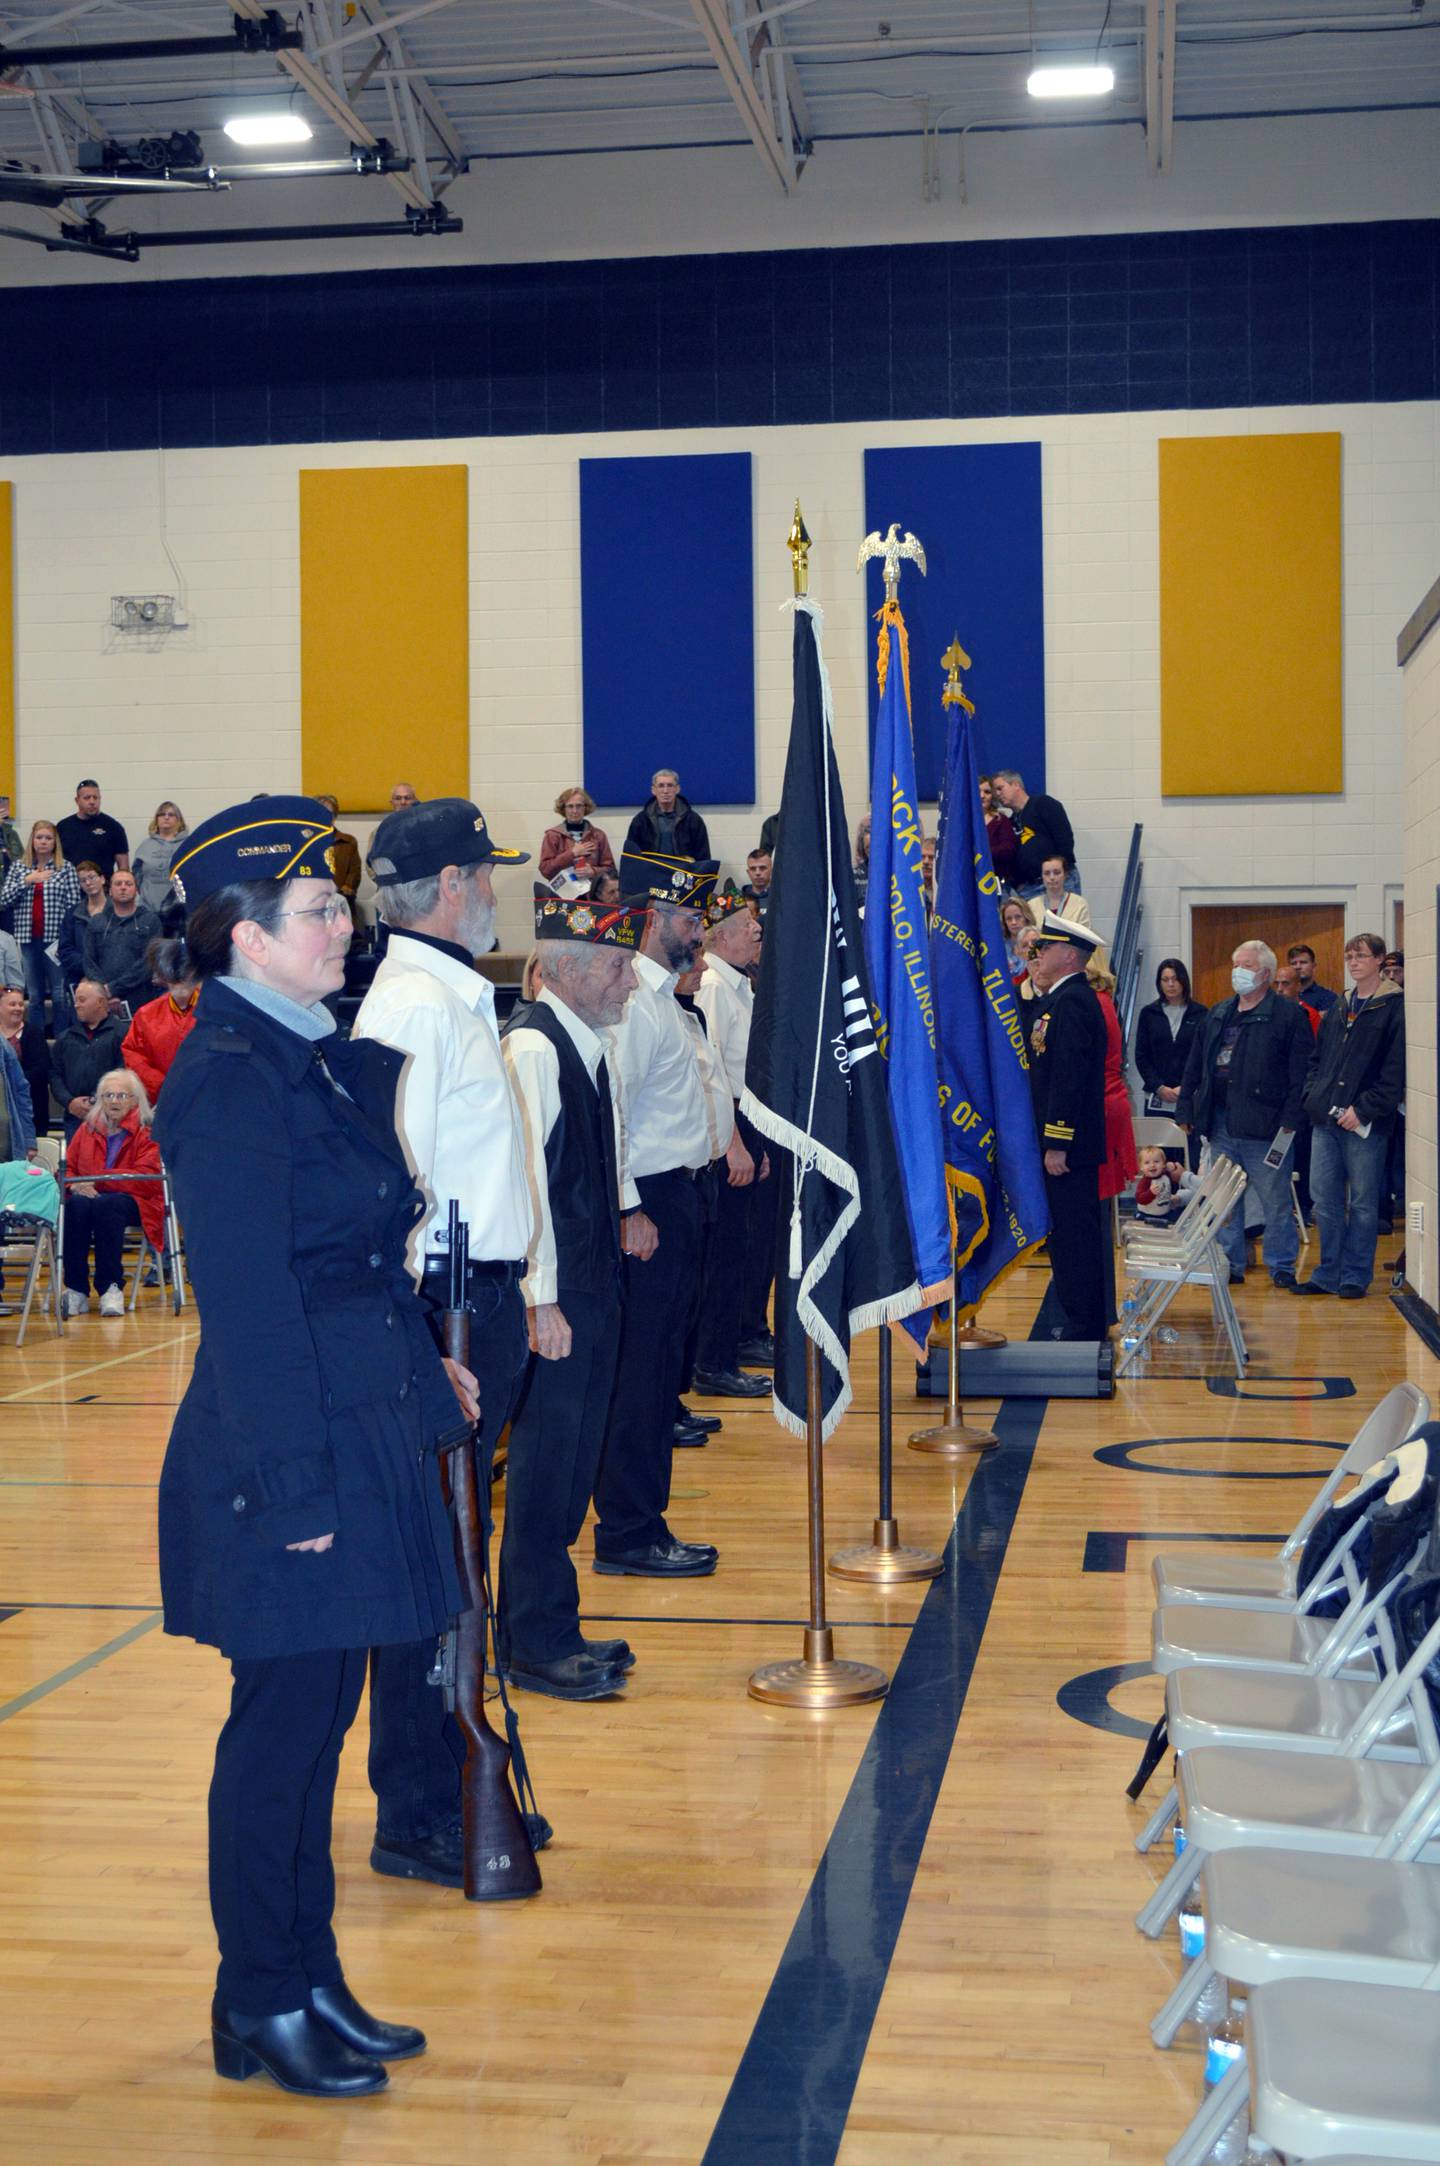 Polo's Honor Guard present the flags at the start of a Nov. 11 Veterans Day ceremony at Centennial Elementary School, which was attended by more than 100 people in addition to students and staff. The Honor Guard's members are from Patrick Fegan American Legion Post No. 83 and Veterans of Foreign Wars Post 8455.